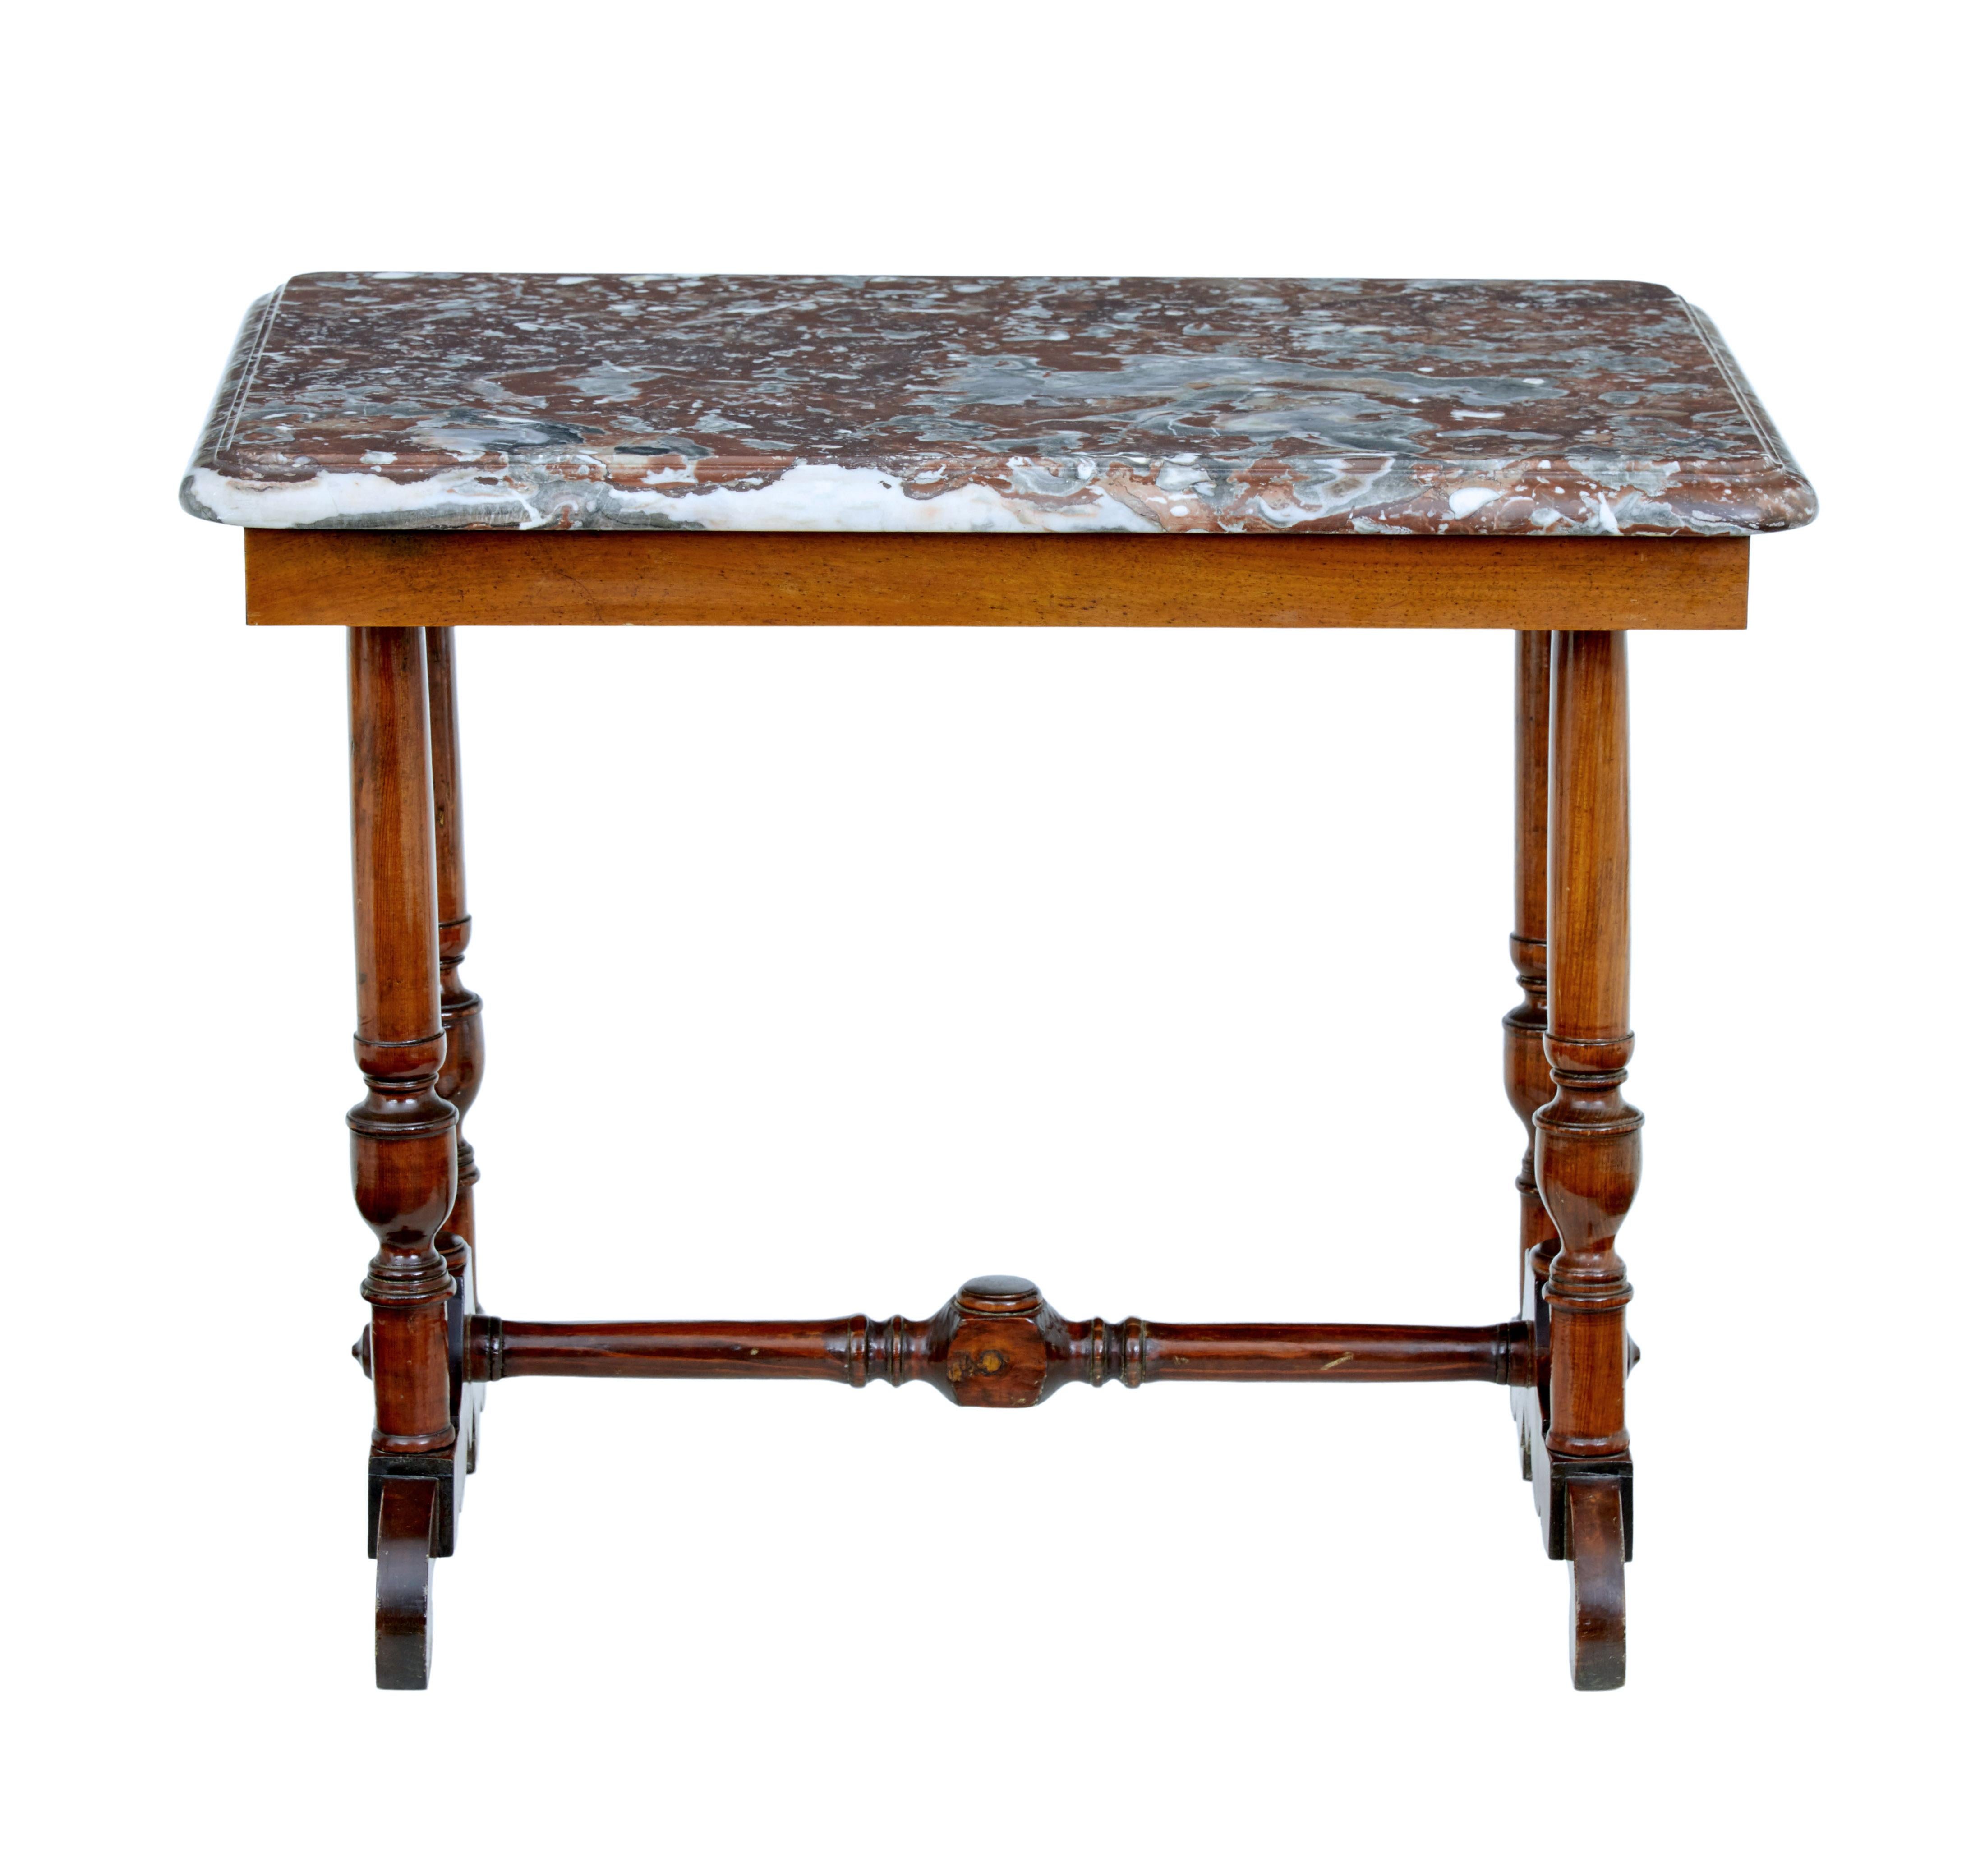 Unusual mahogany and marble side table, circa 1890.

Mahogany frame table with a substantial marble top. Base with 4 turned legs and scrolling feet united by stretcher. Original marble top with bull nosed edge.

Multiple uses such as a lamp or